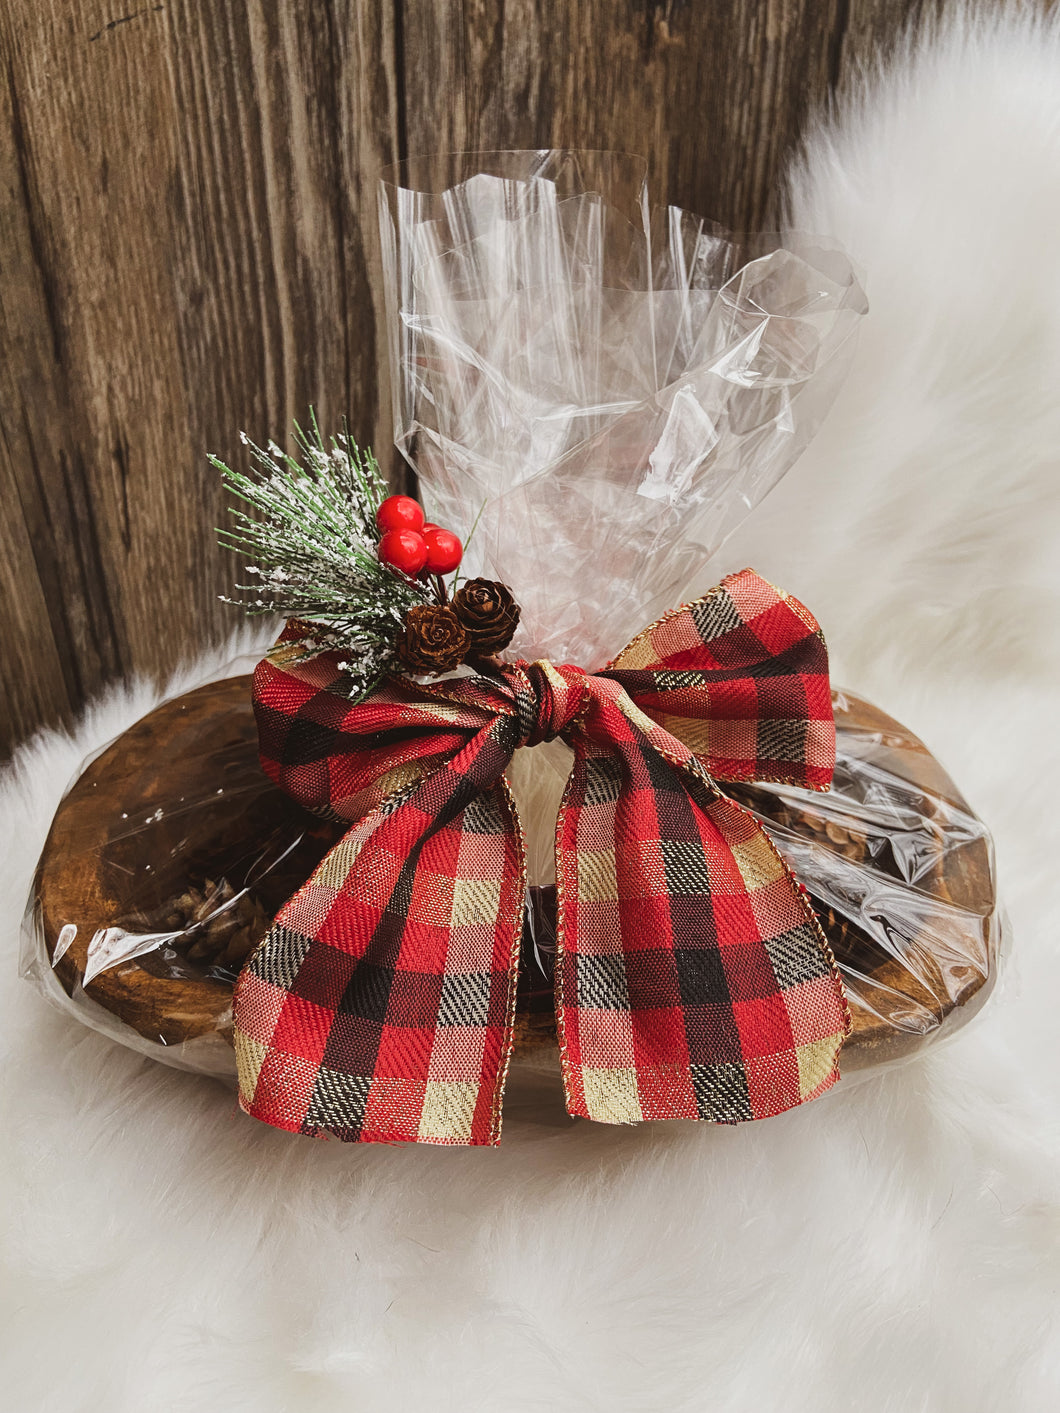 8oz Candle Dough Bowl Gift Baskets | Winter Gifts